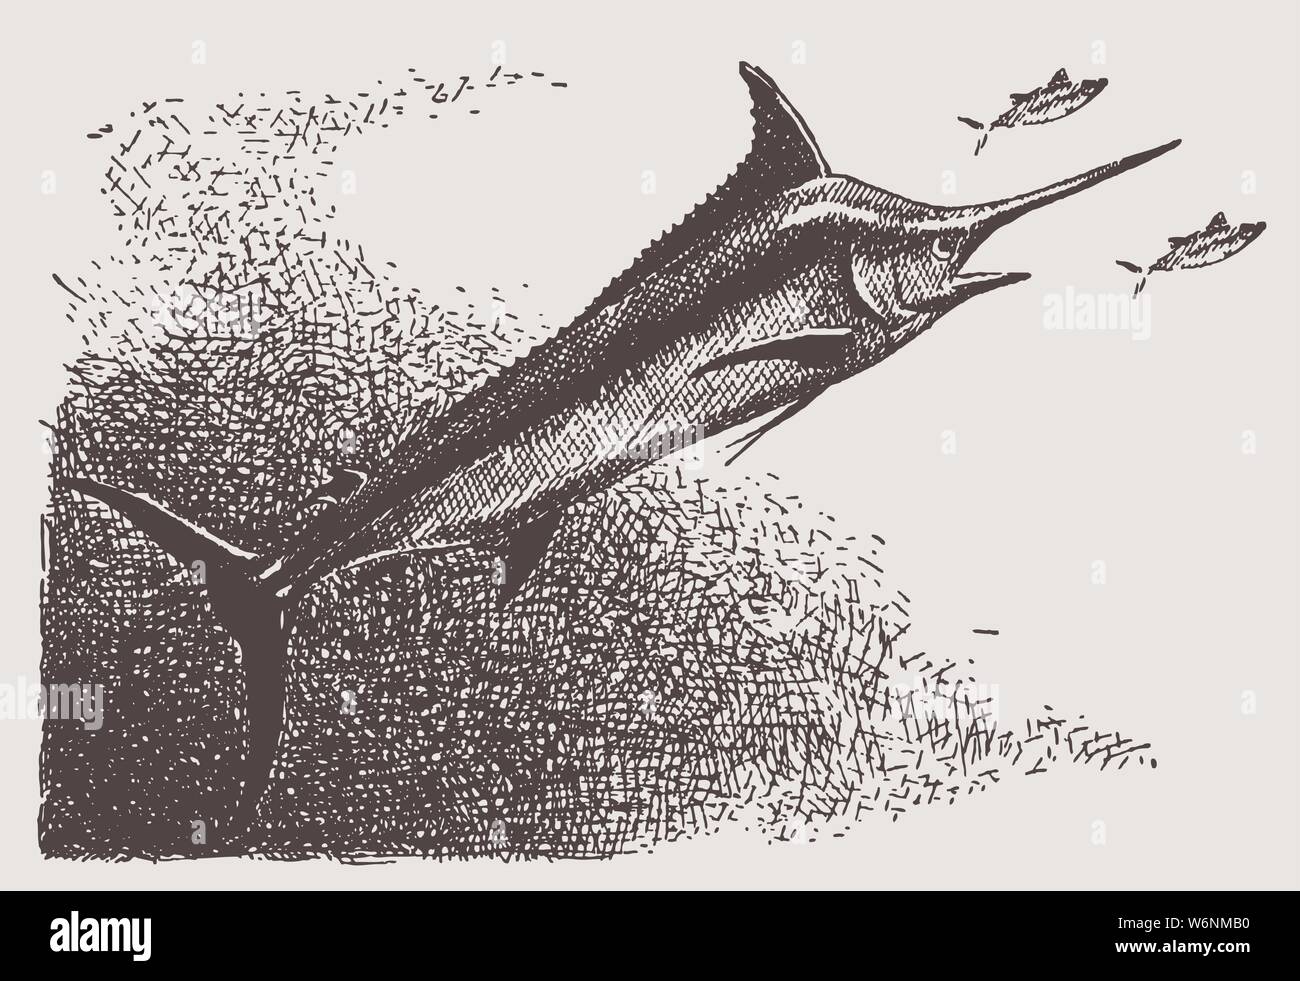 Threatened atlantic blue marlin (makaira nigricans) in side view. Illustration after a historic engraving from the early 20th century Stock Vector